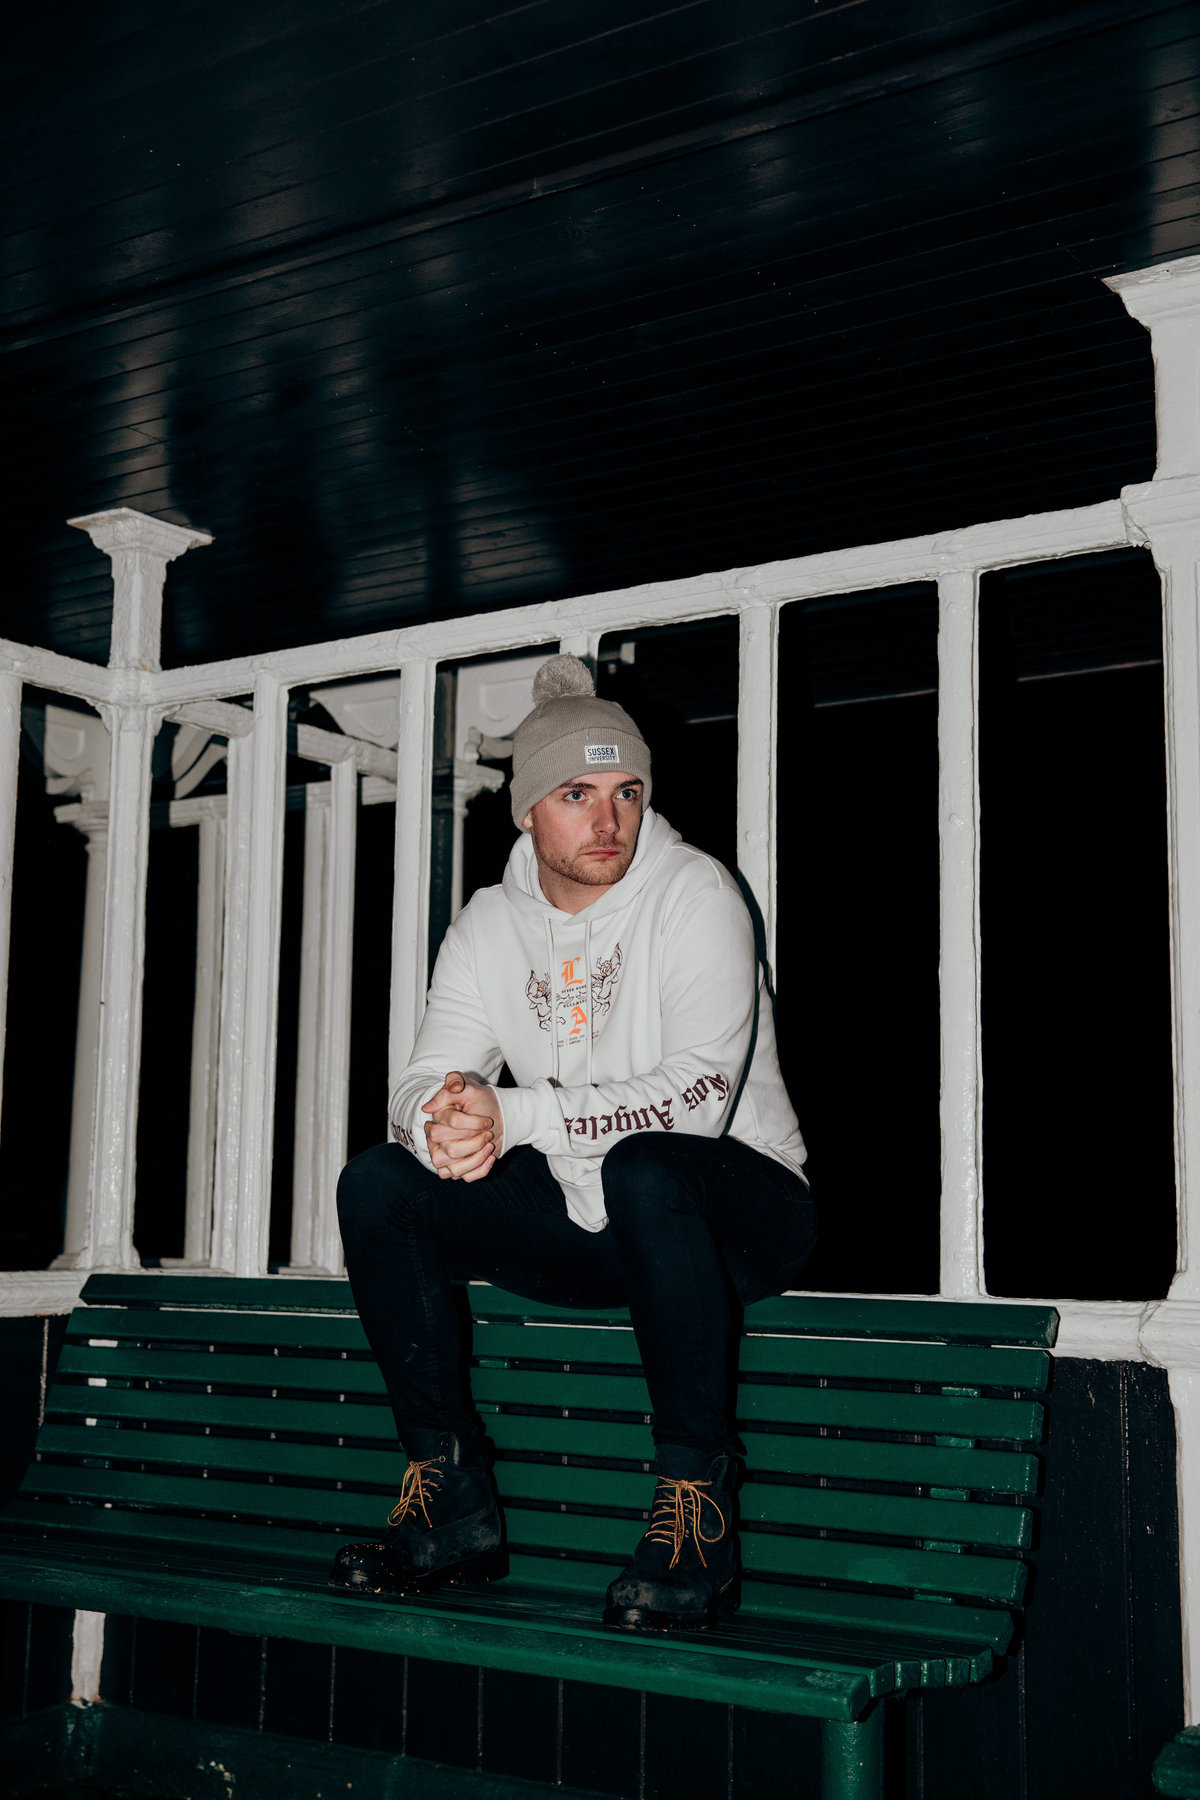 Connor sat on top of a bench under a shelter on Brighton Beach, shot at night with flash.